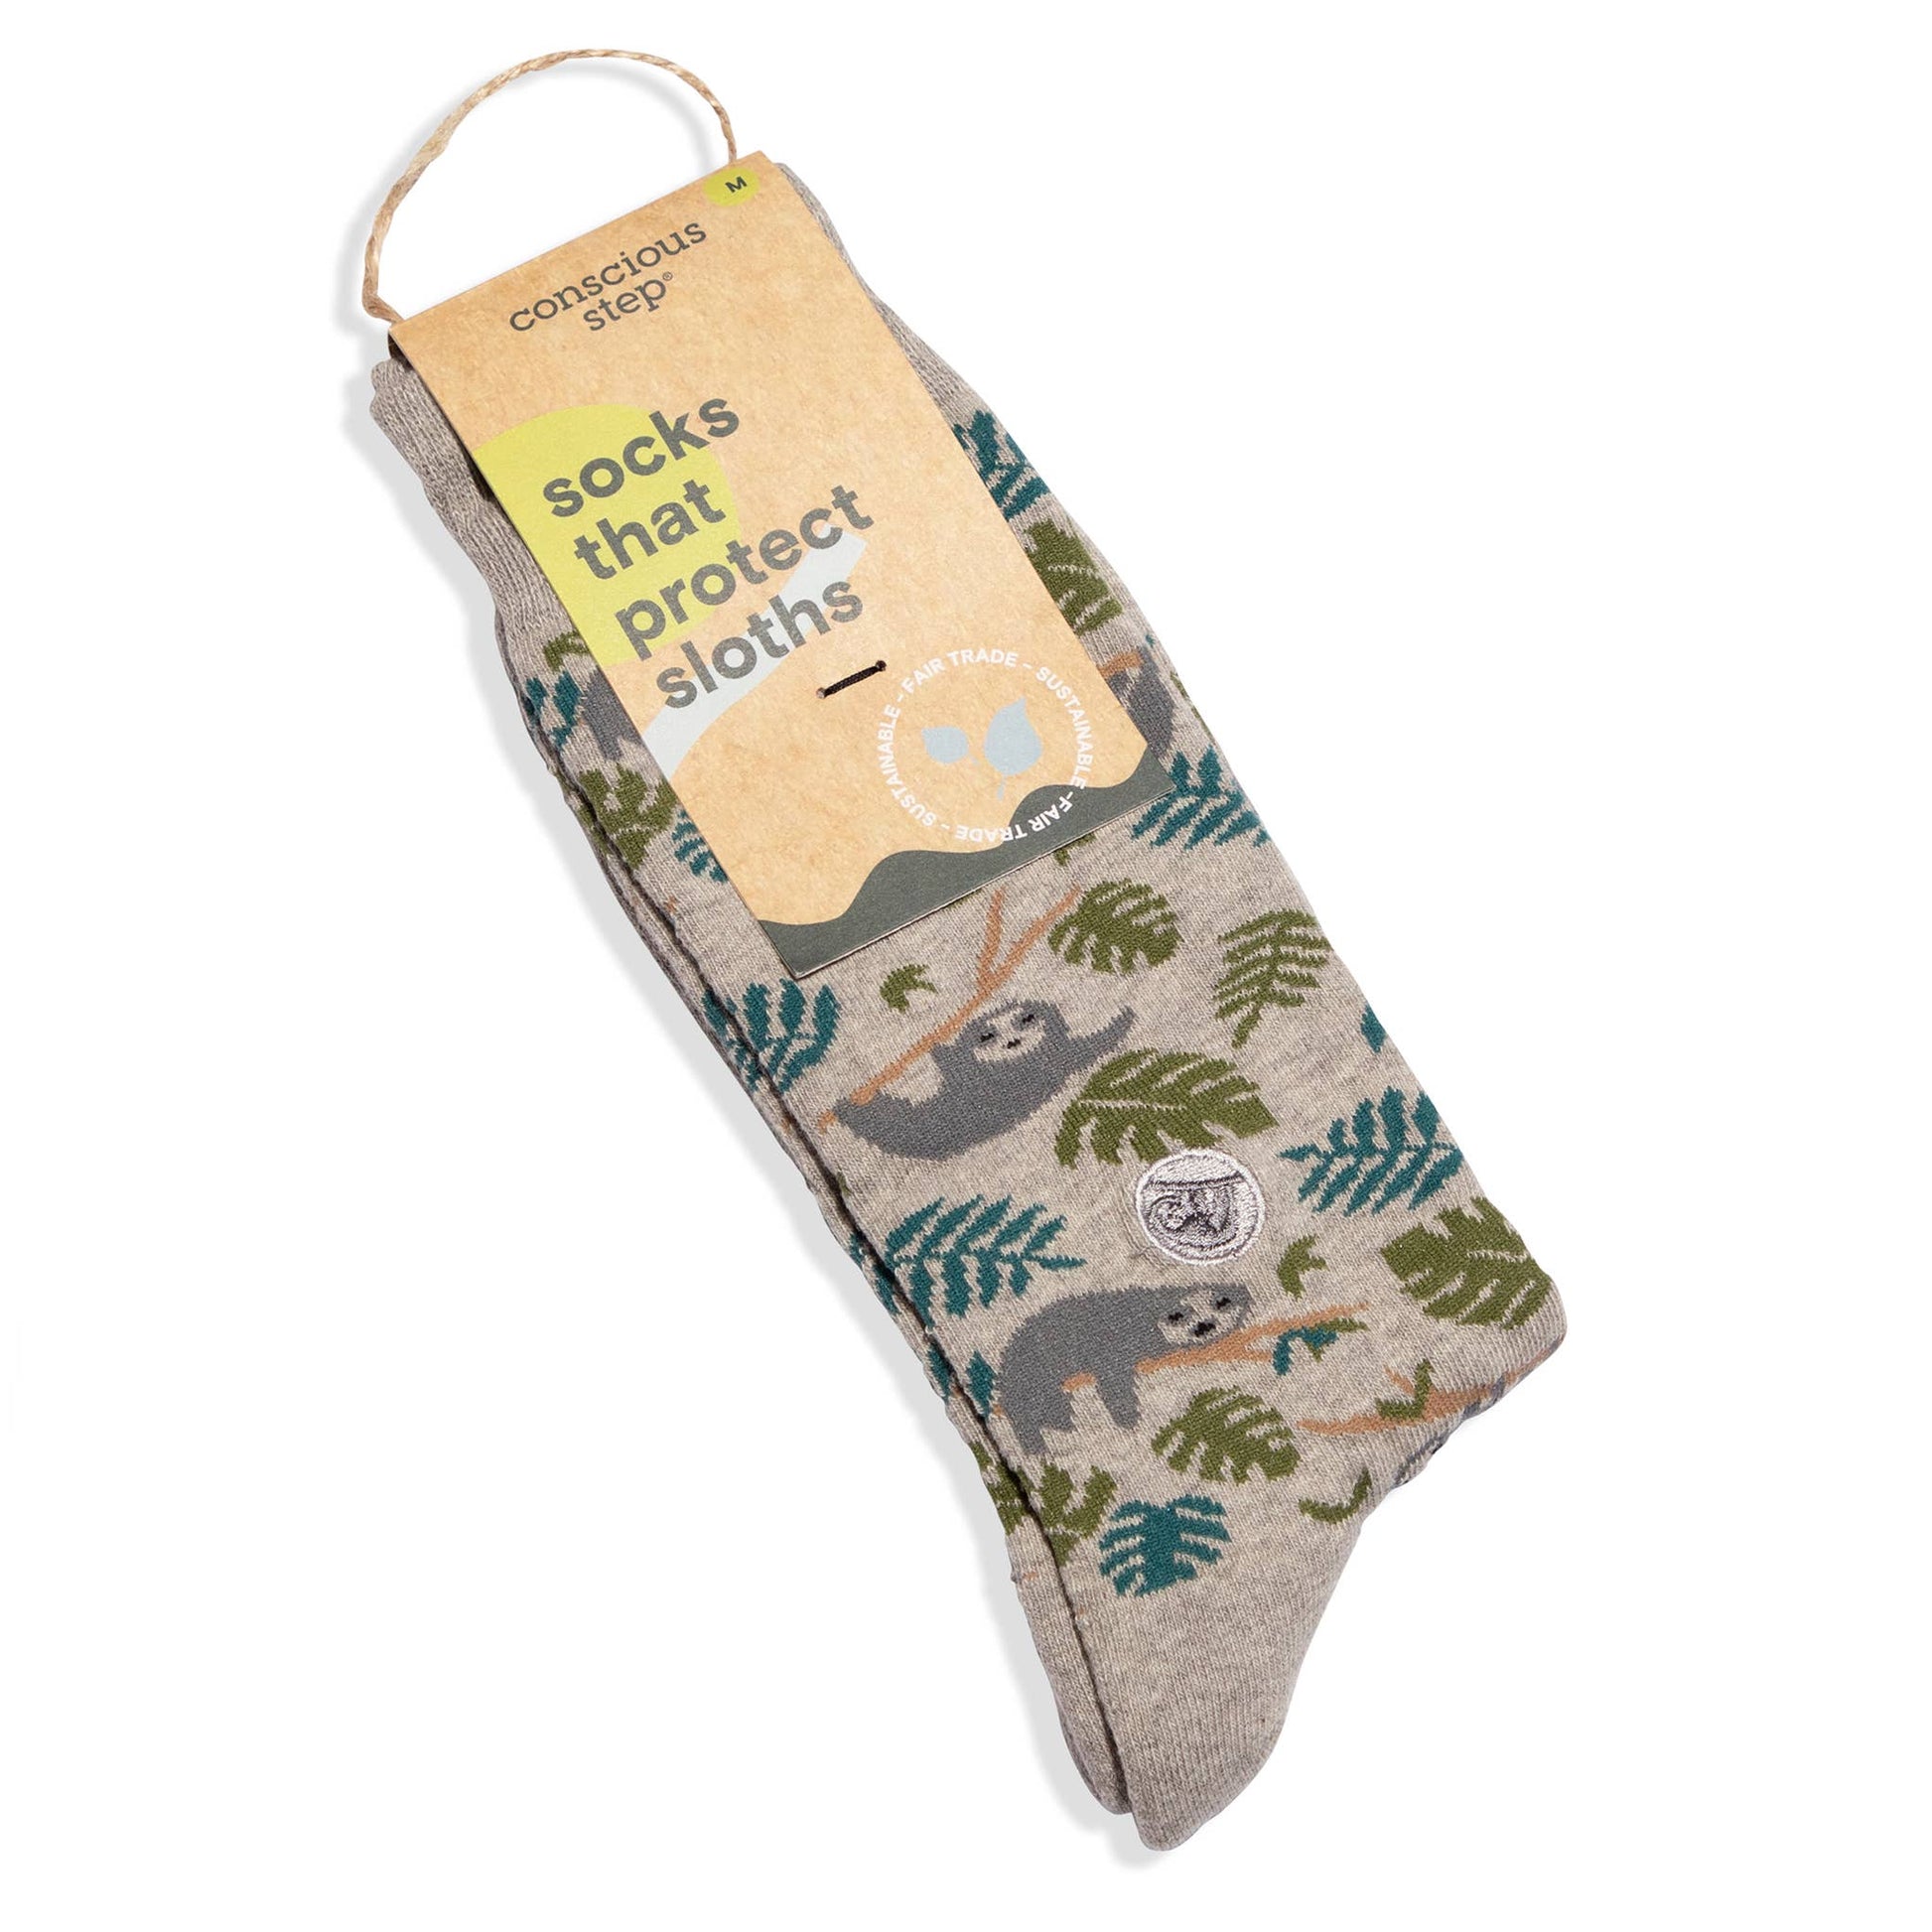 Conscious Step - Socks that Protect Sloths  Conscious Step Small  -better made easy-eco-friendly-sustainable-gifting